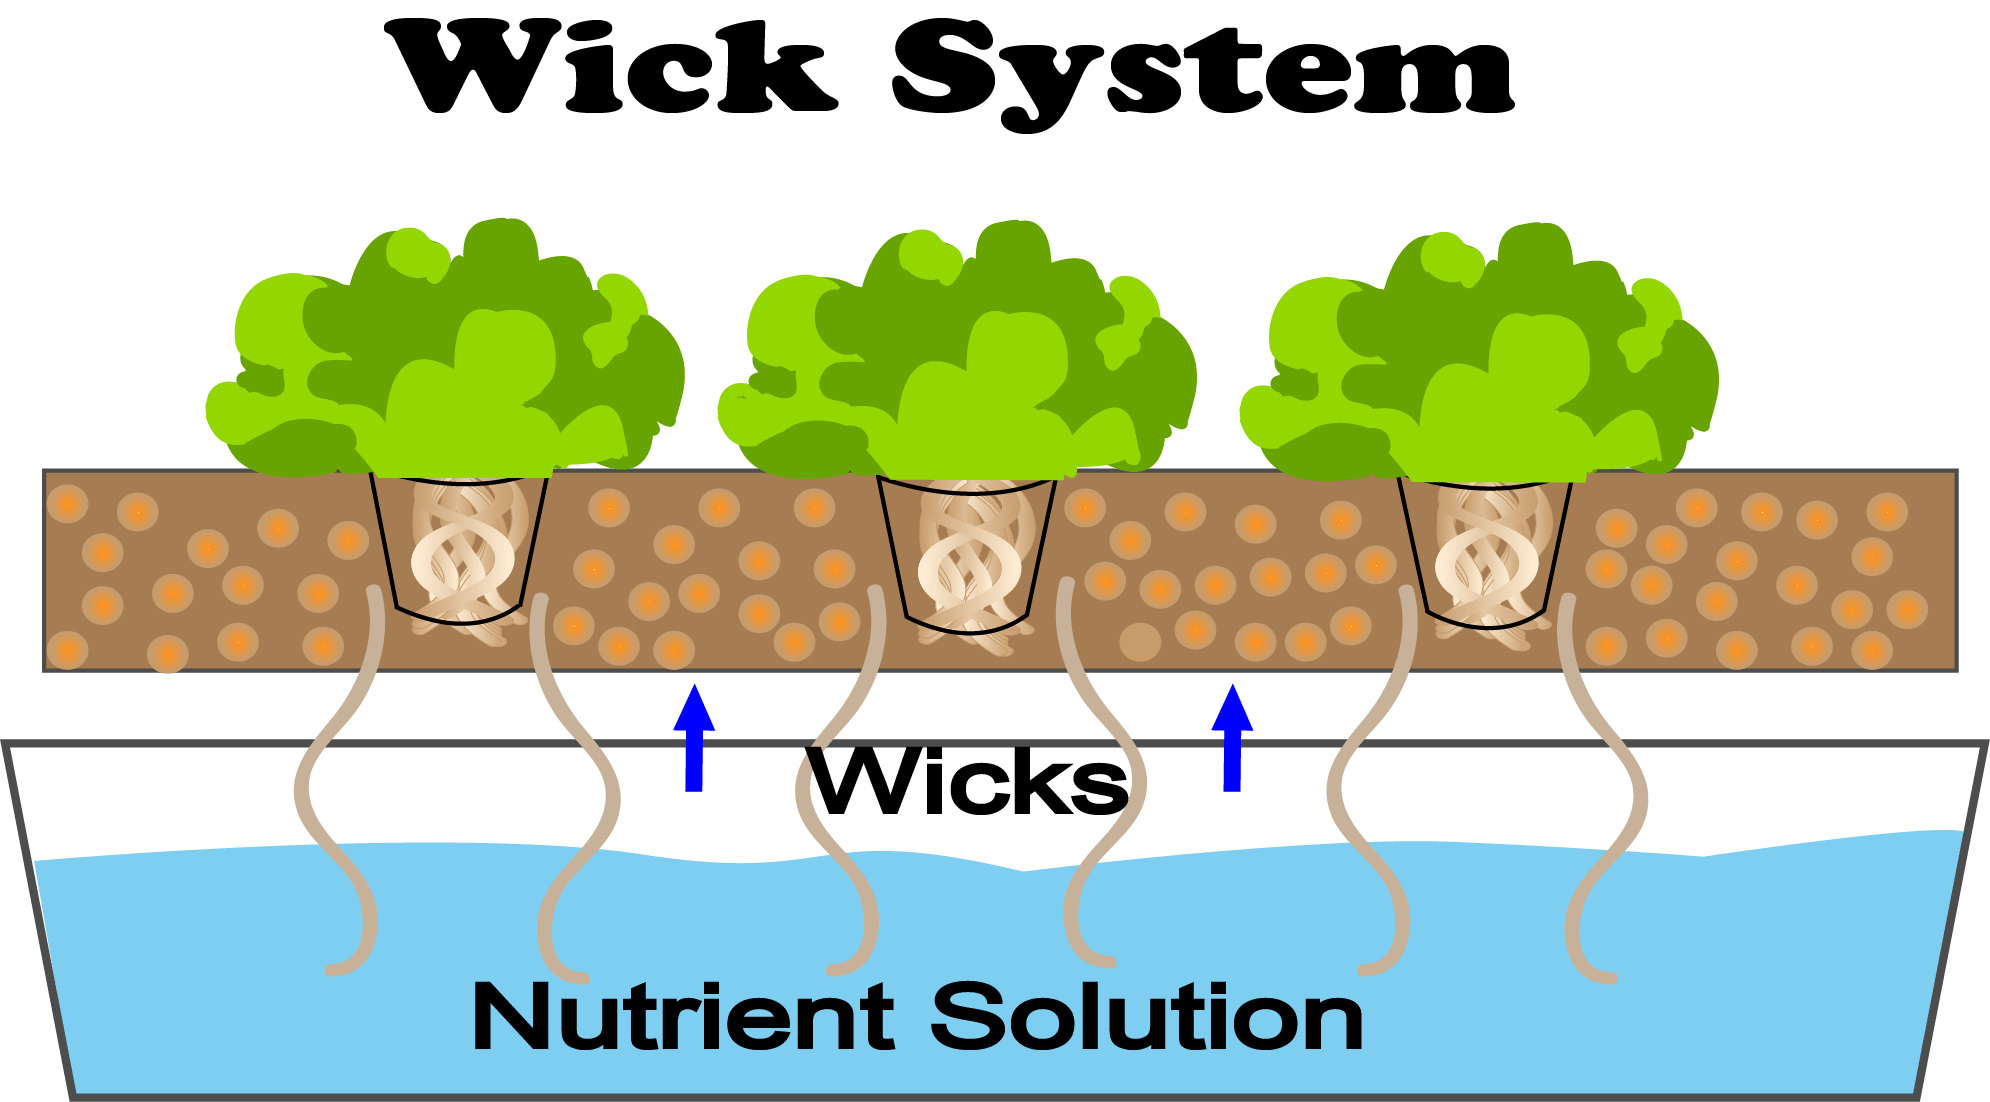 The wick system irrigates the plants via a candle wick and delivers the water and nutrients in a hydroponic manner